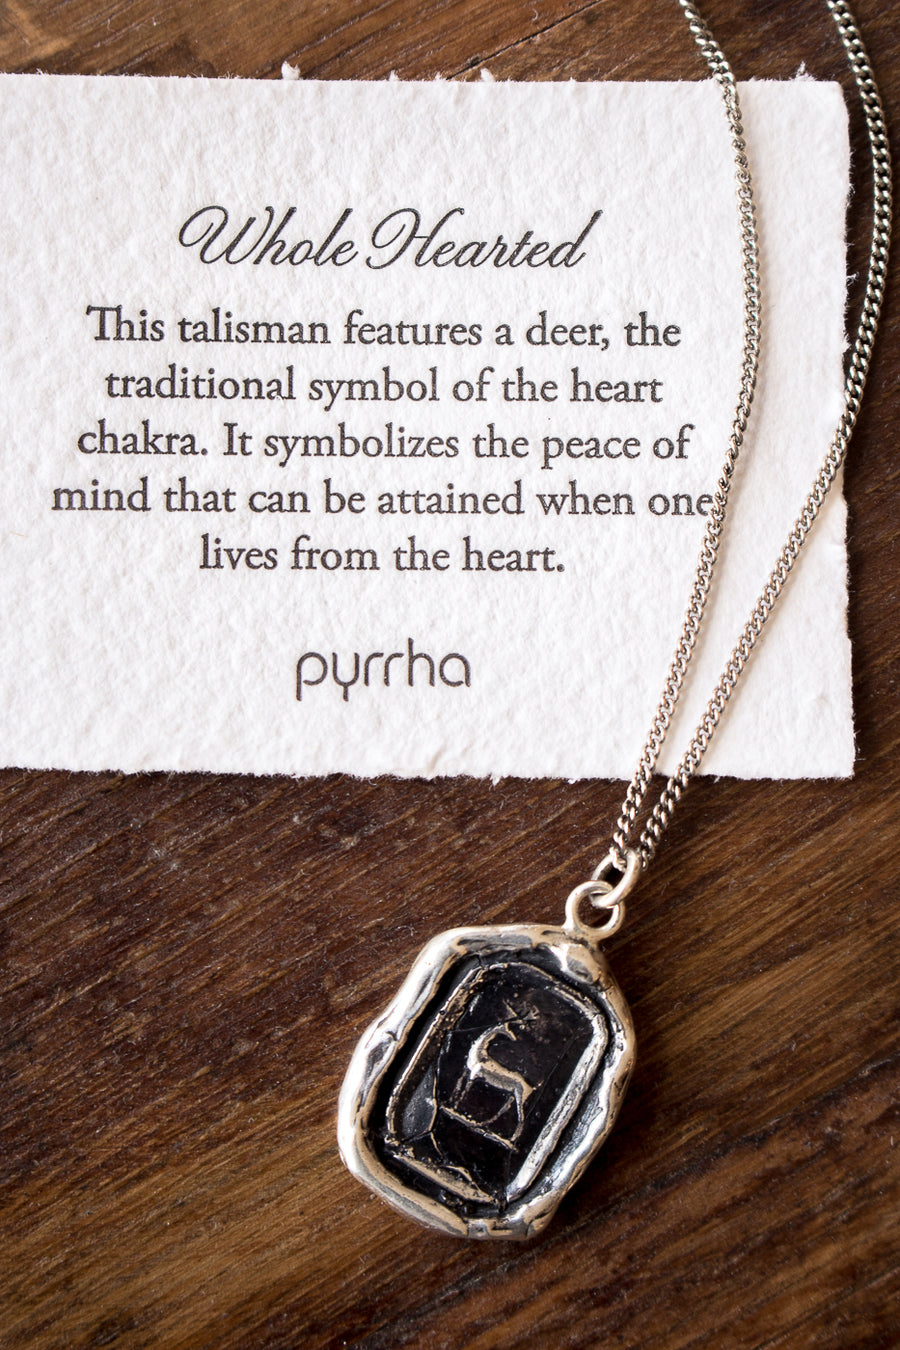 Whole Hearted Necklace